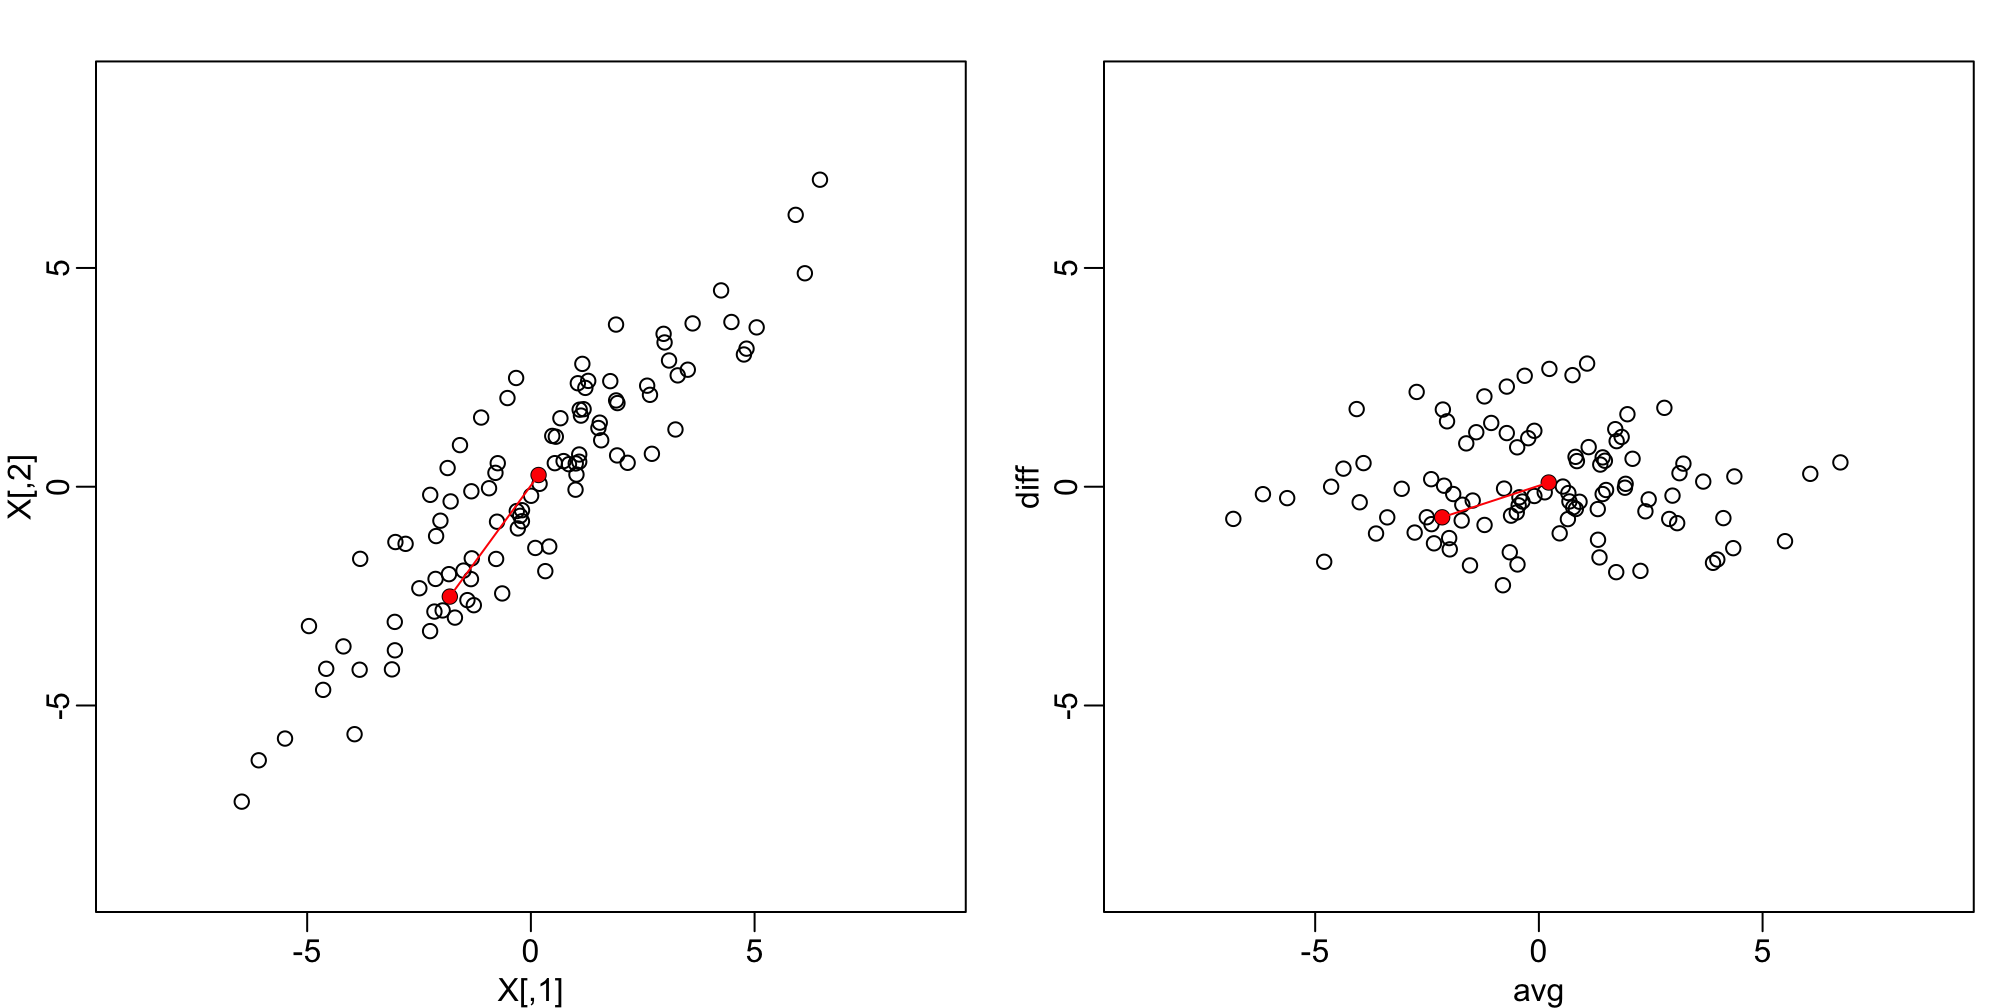 Twin height scatterplot (left) and MA-plot (right).